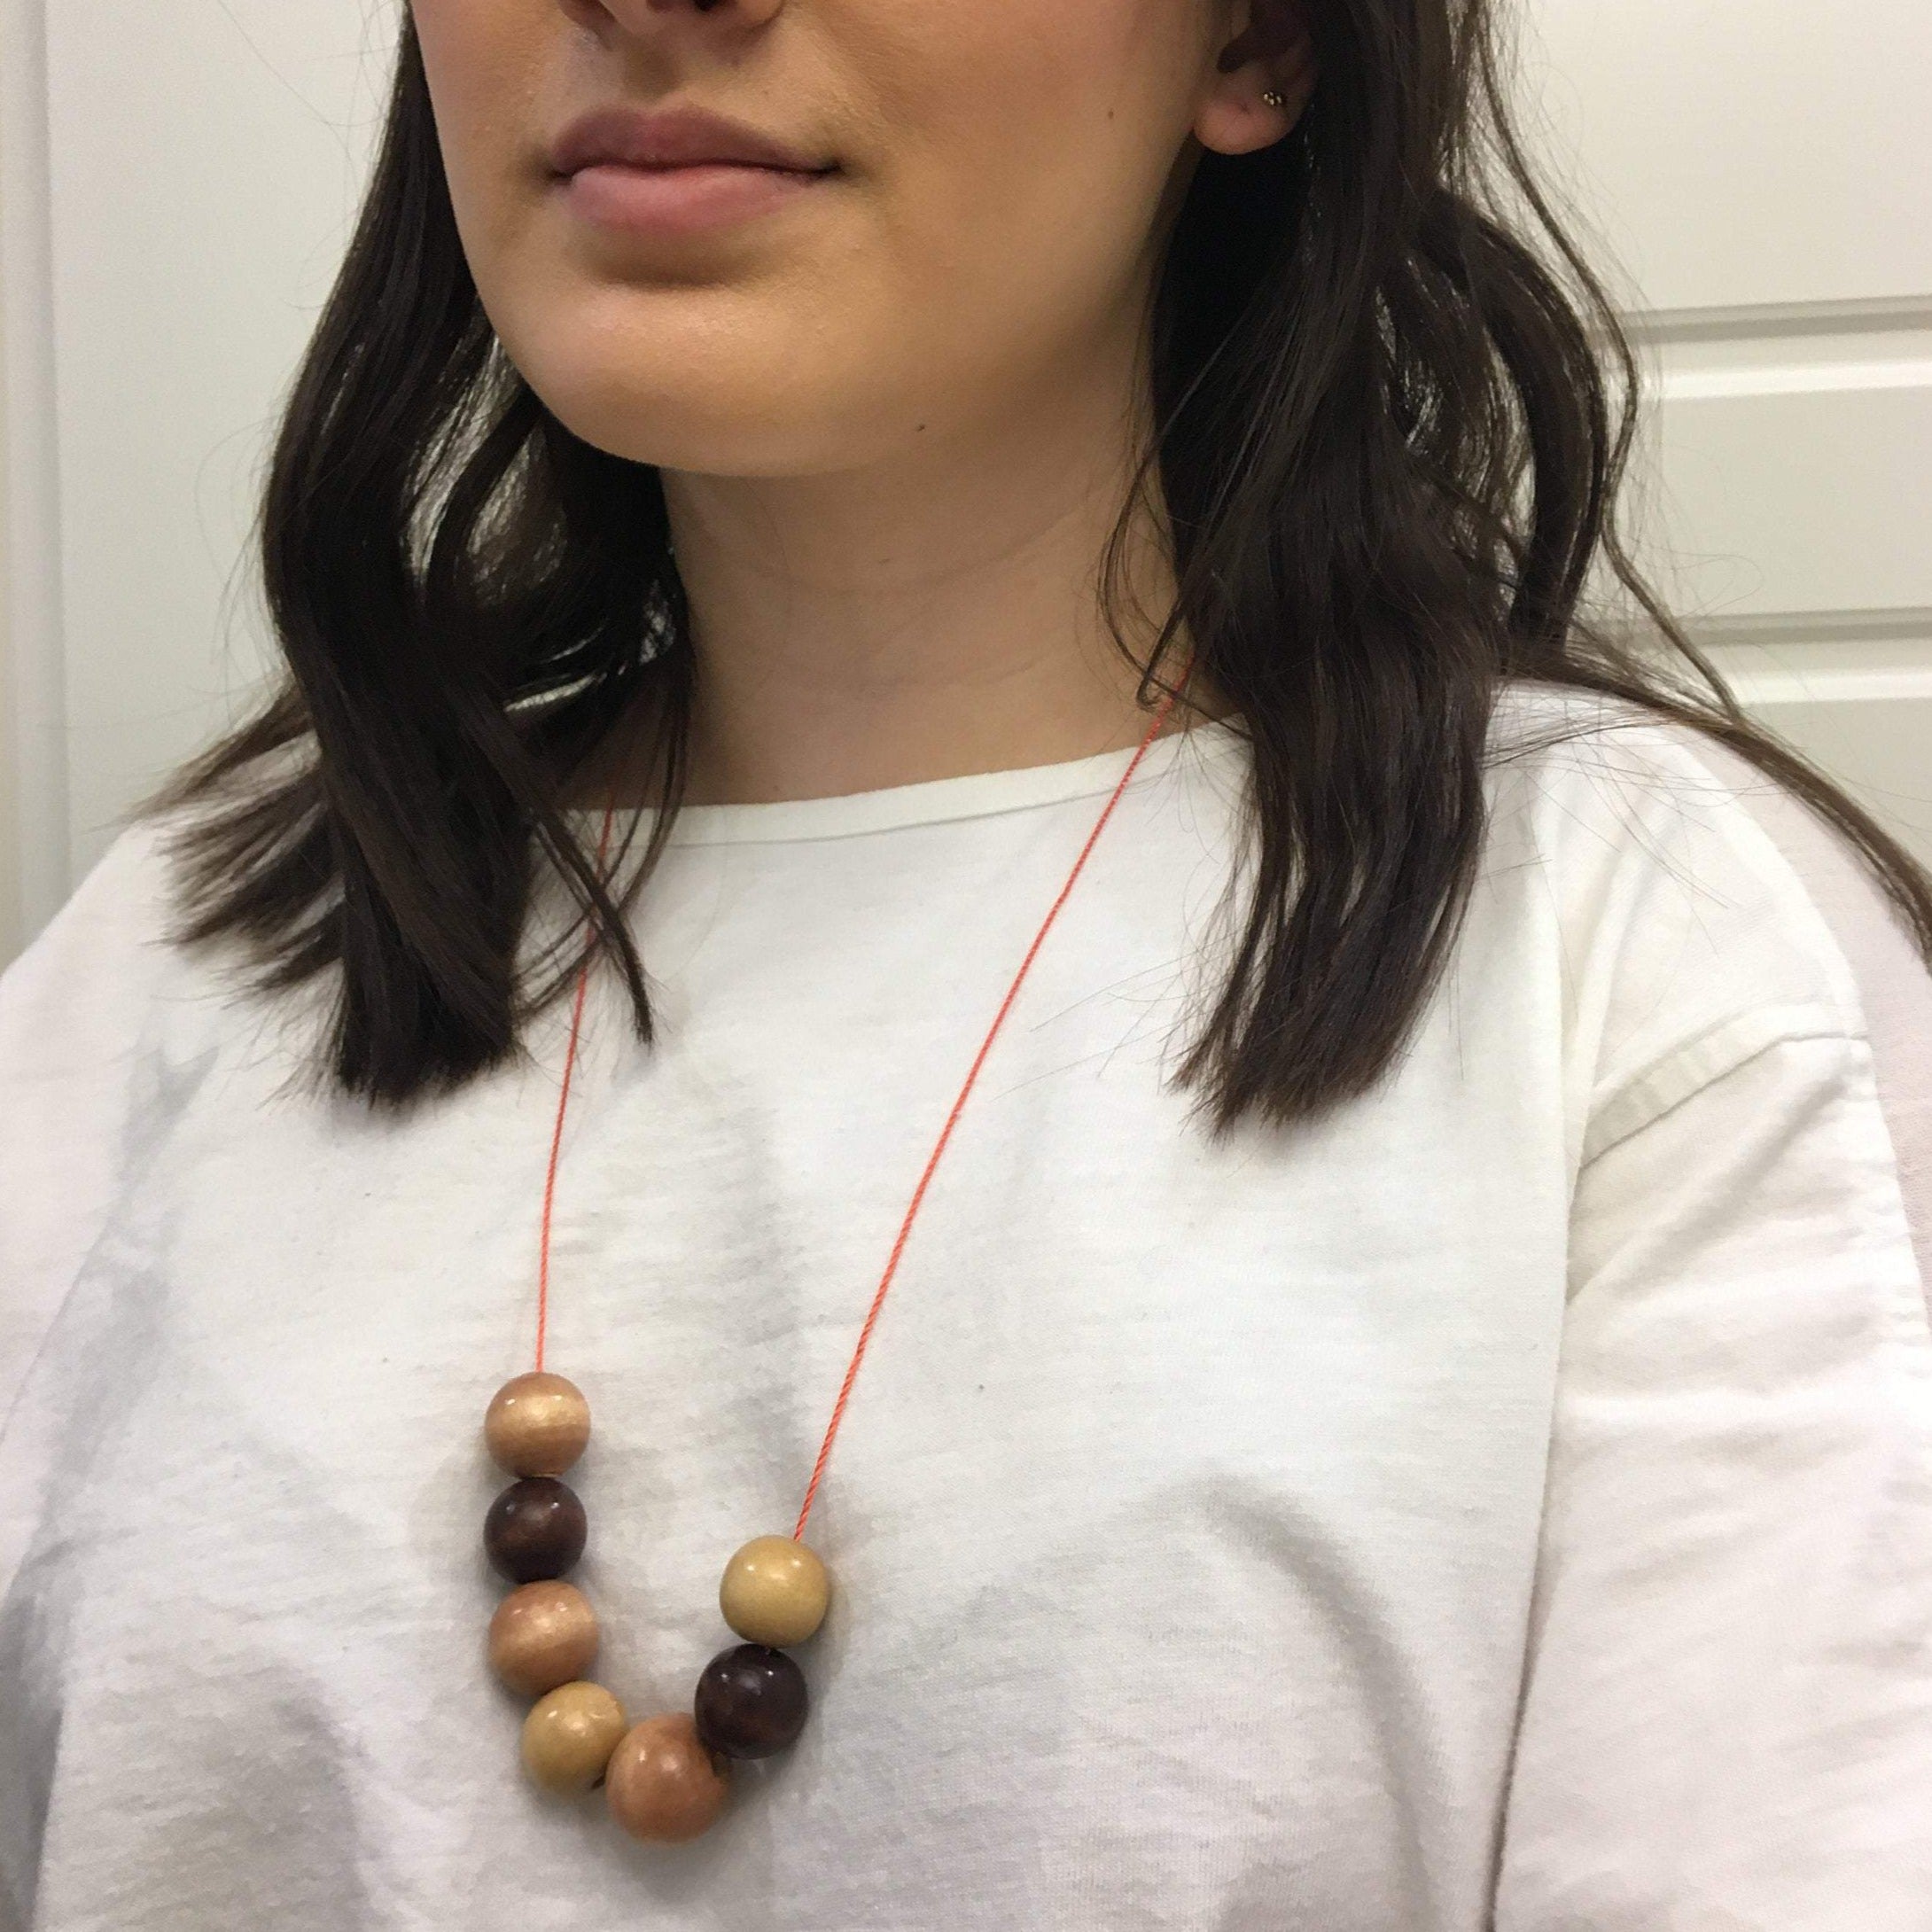 Wooden Bead Necklaces - Naturally Hand Dyed Beads